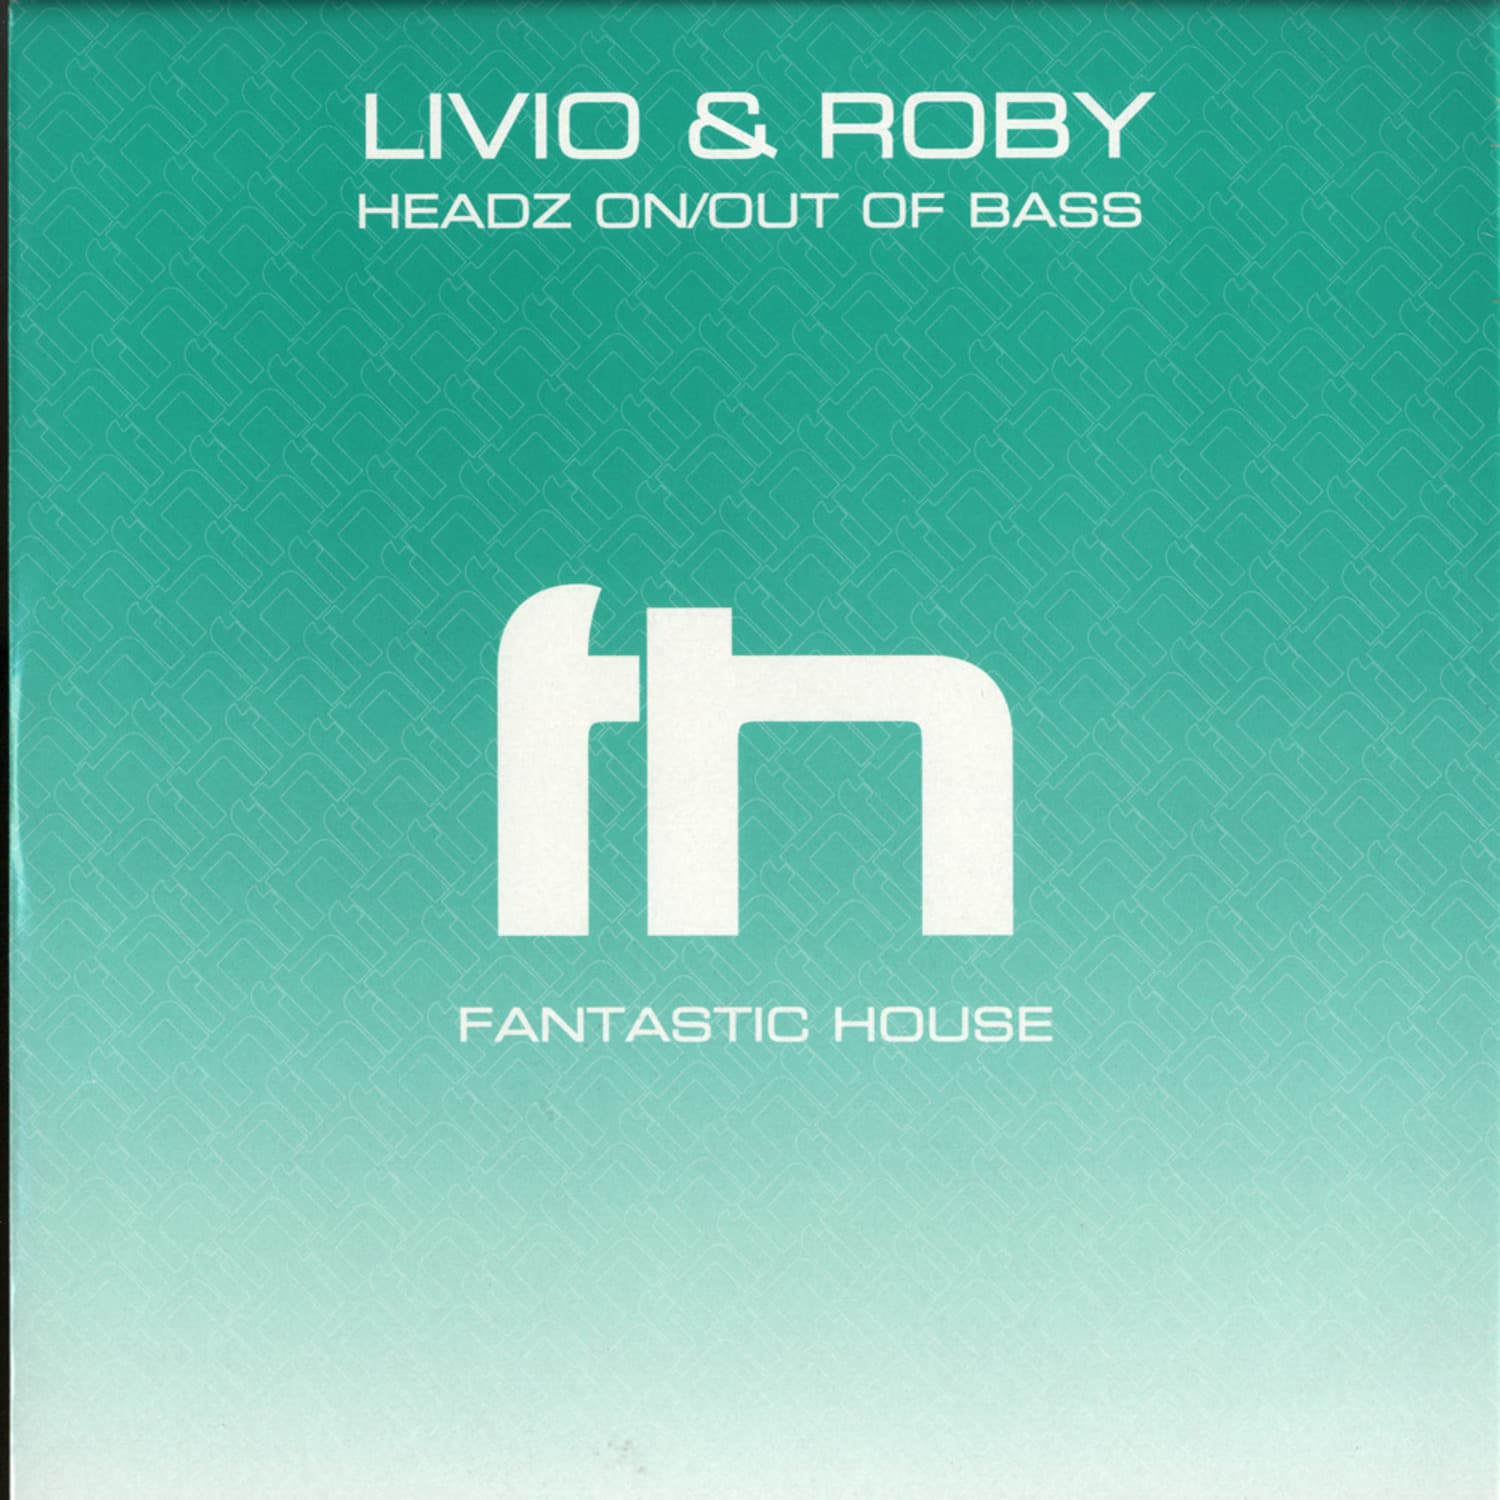 Livio & Roby - HEADZ ON / OUT OF BASS